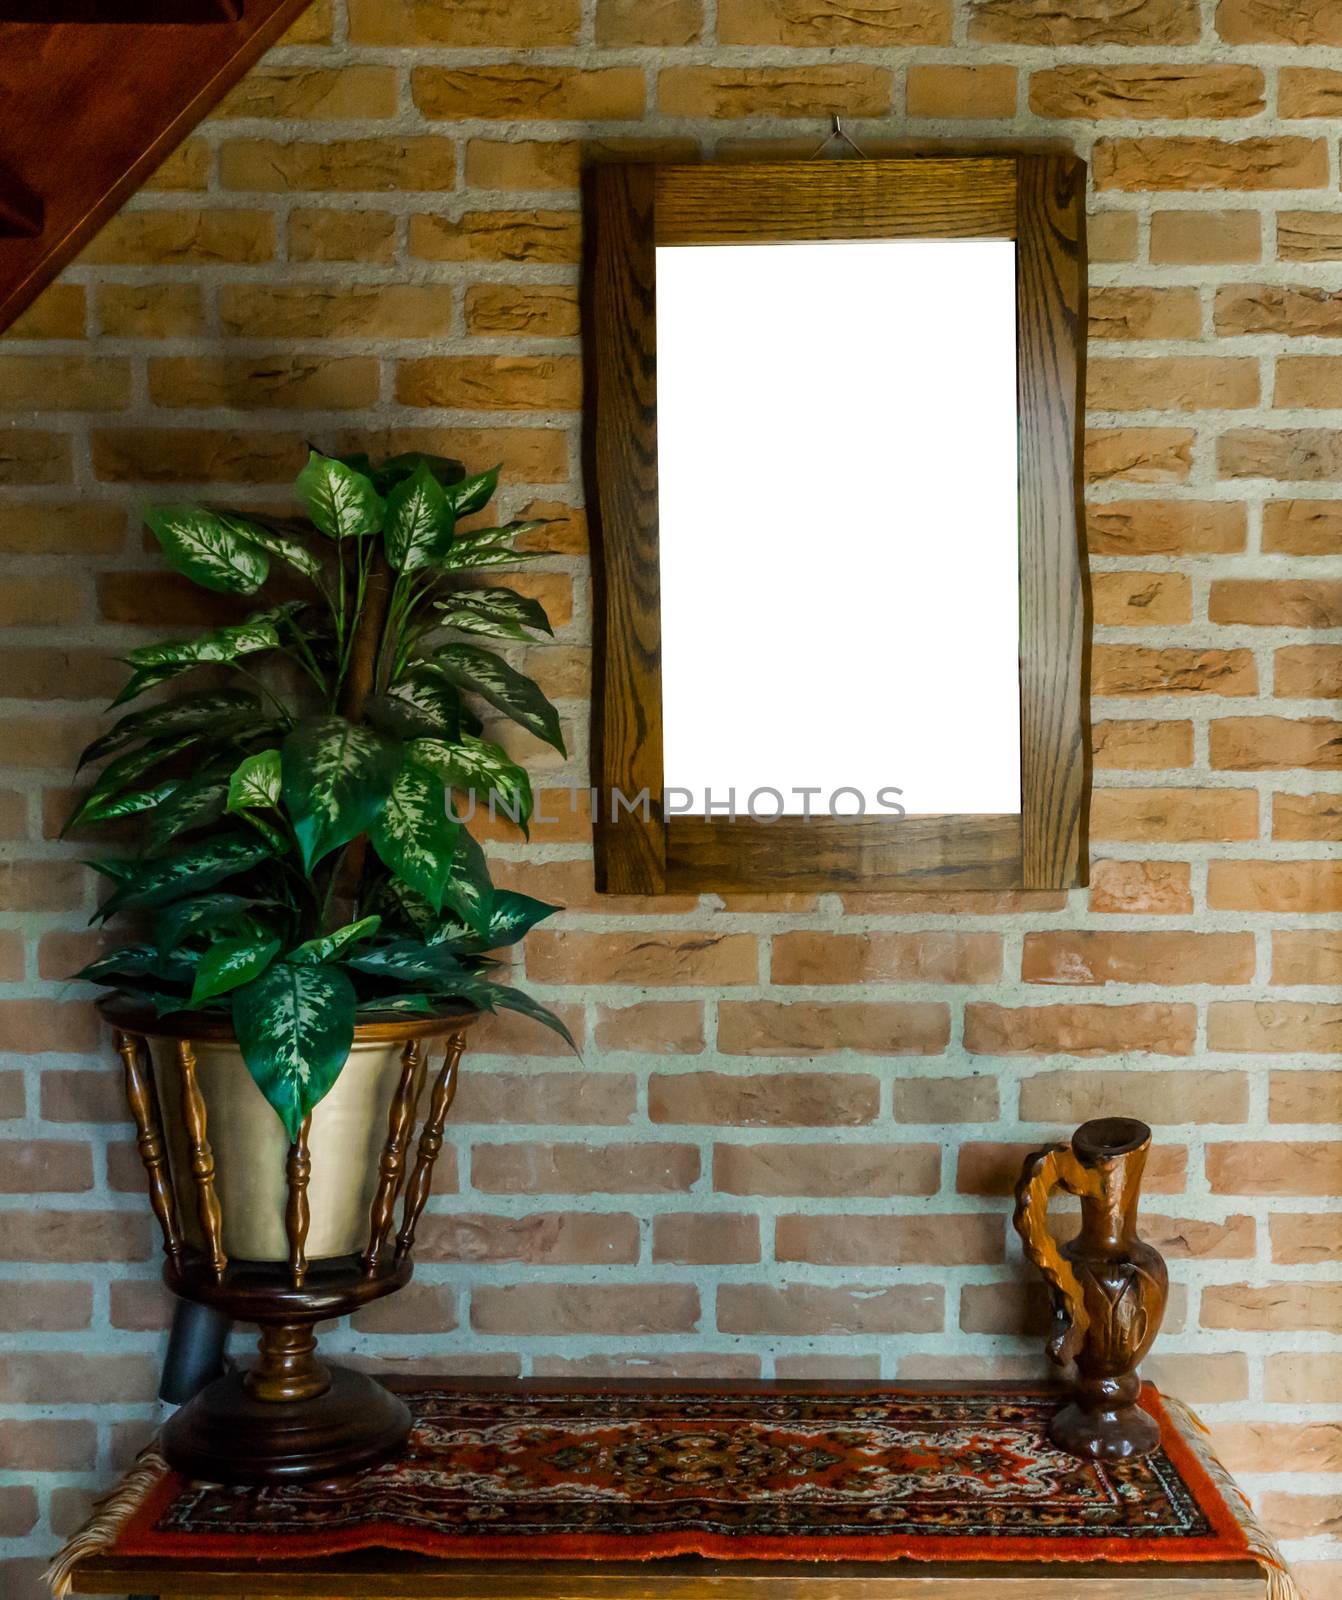 empty blank cut out wooden painting or mirror frame hanging on a brick wall above a table cabinet with a carpet rug decorated with a house plant and vase background texture by charlottebleijenberg